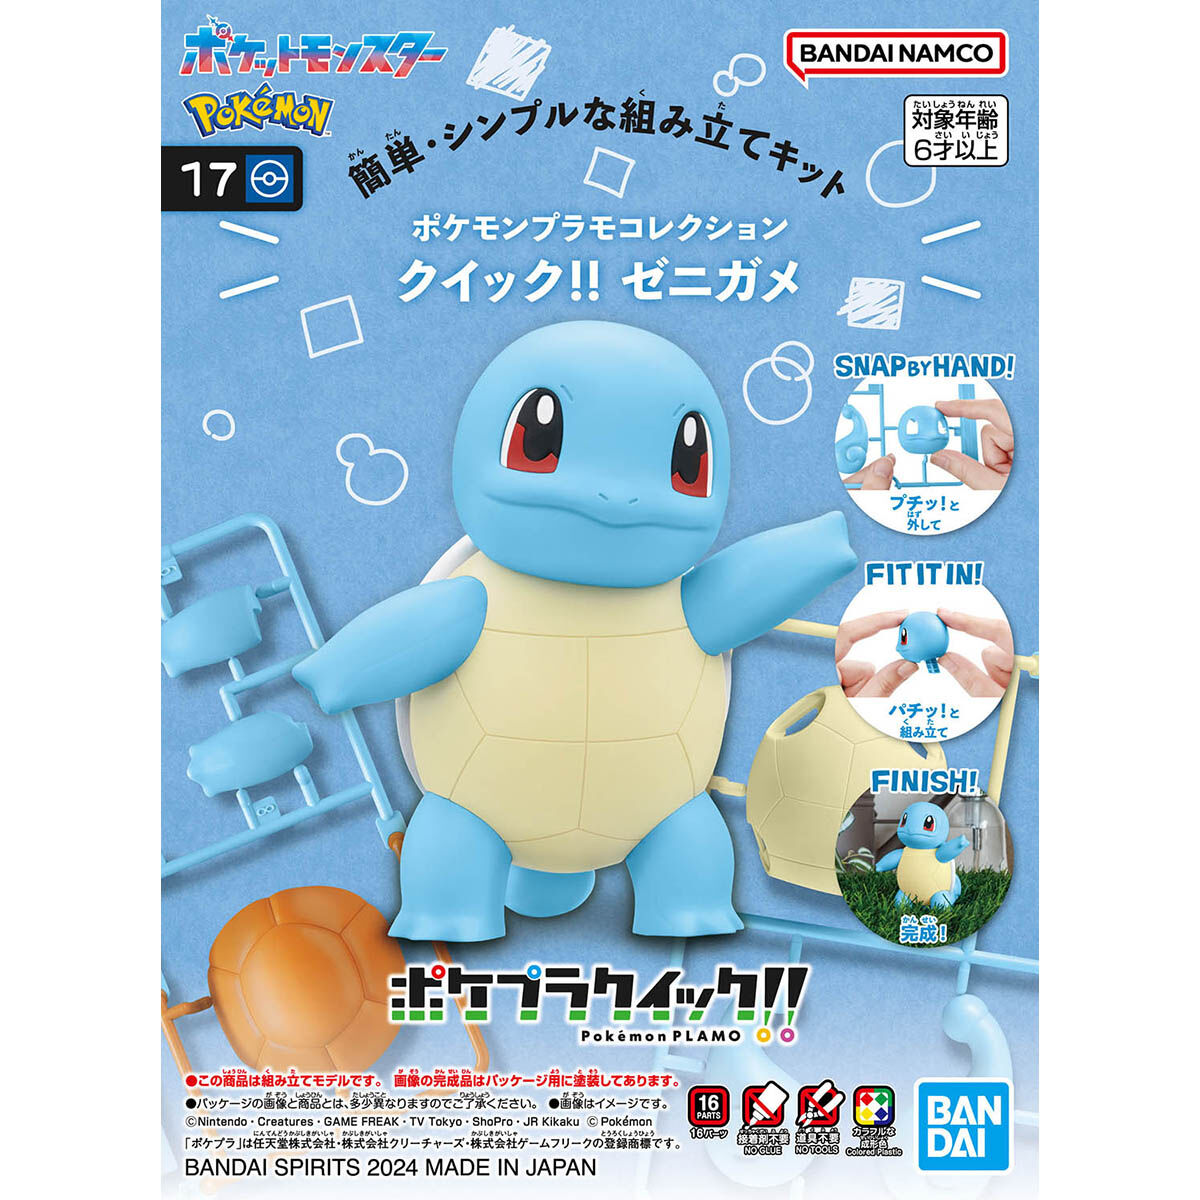 squirtle box art